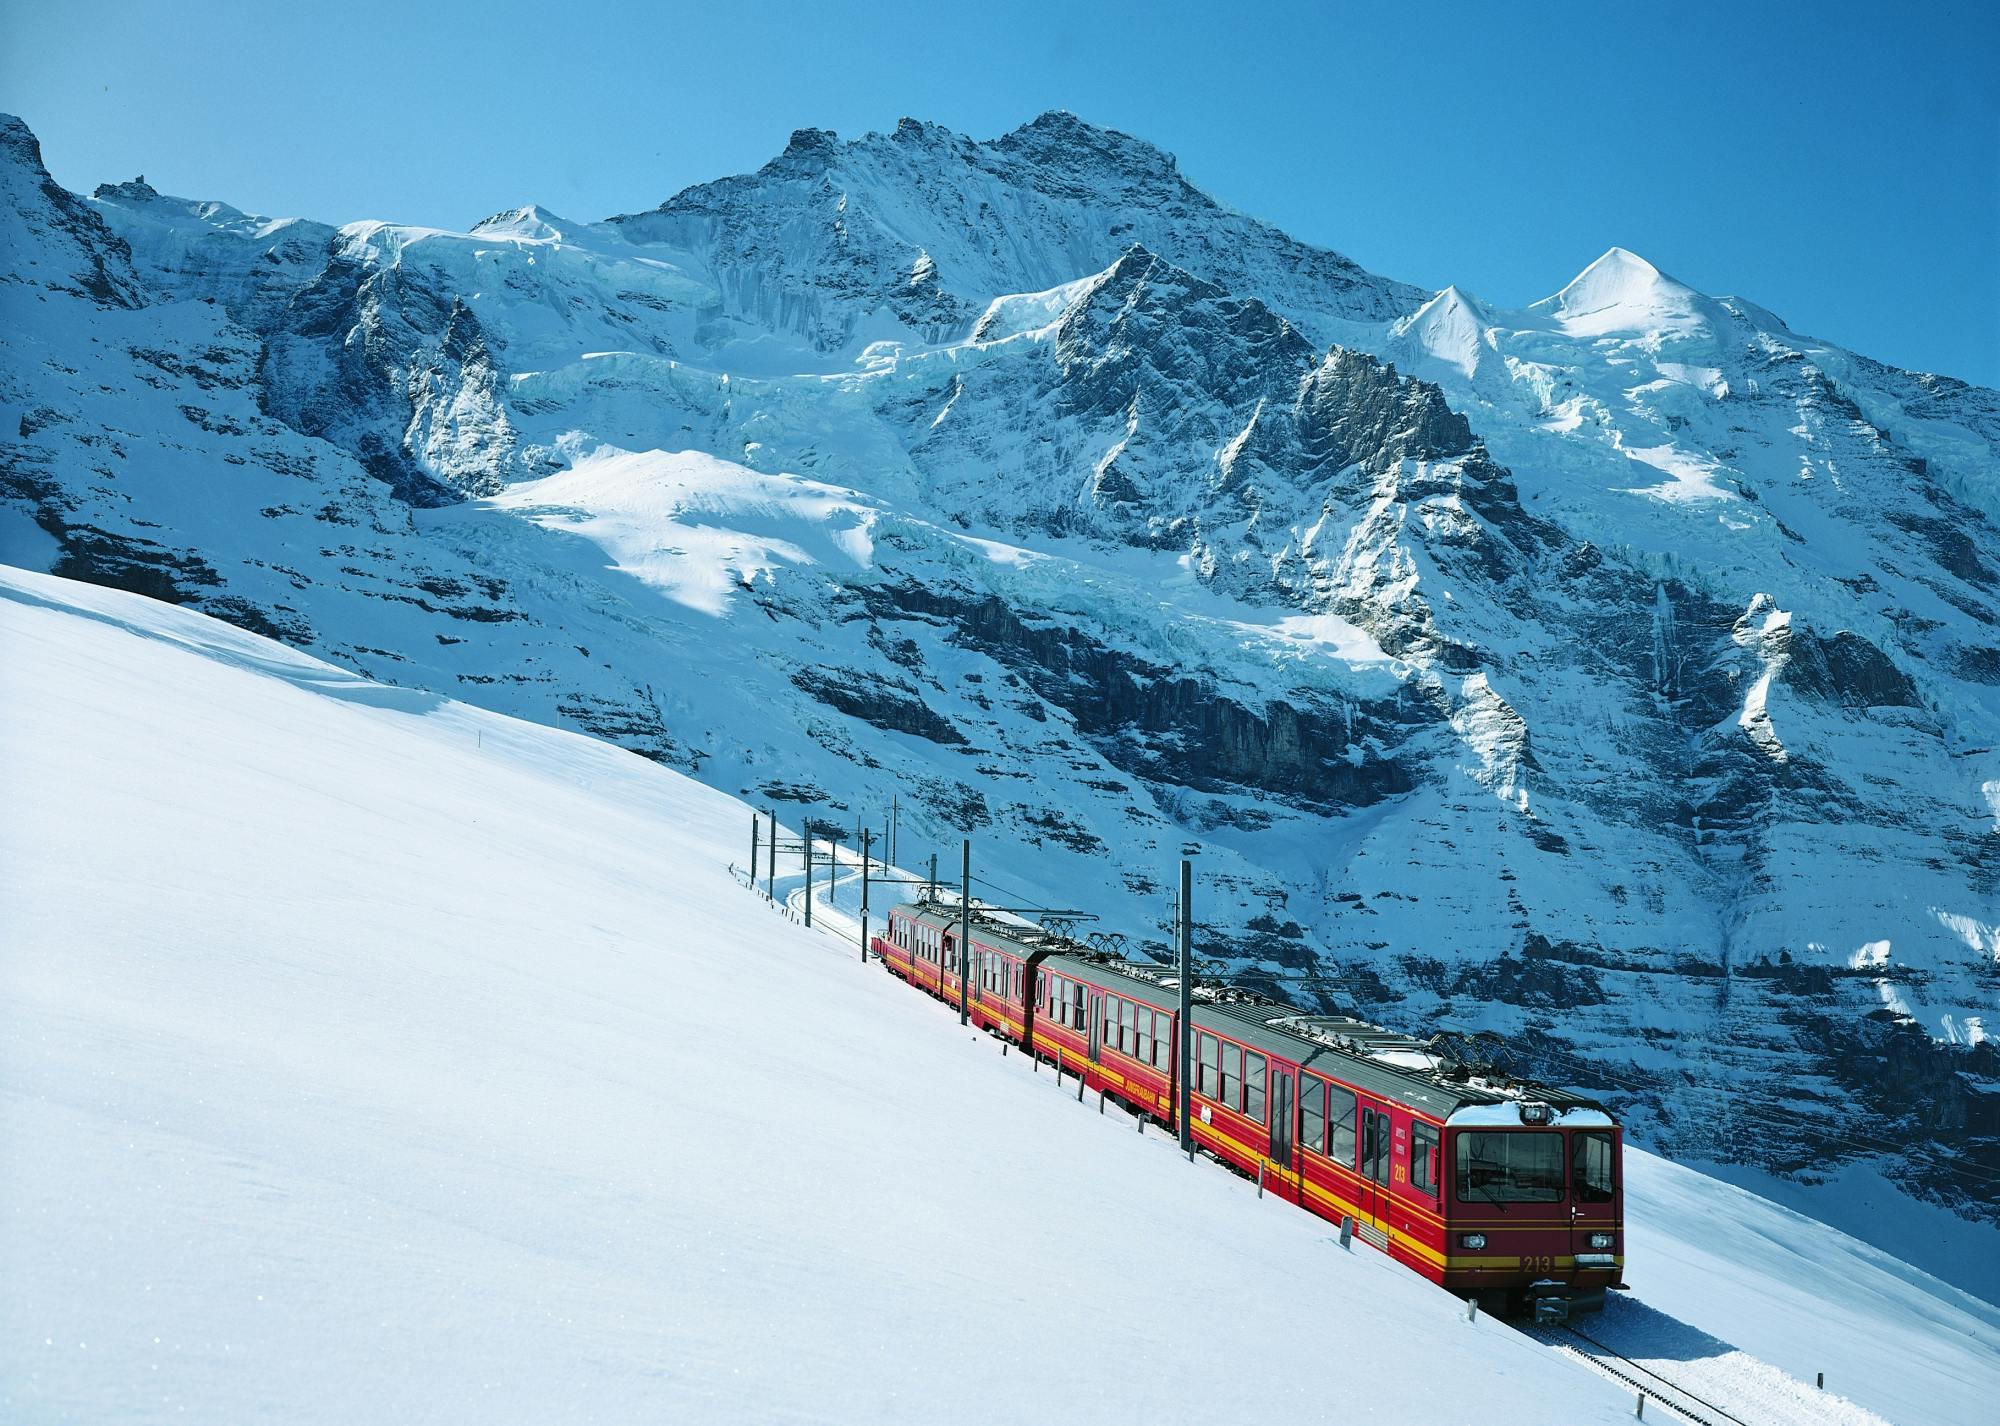 Day trip to Jungfraujoch from Lucerne Musement